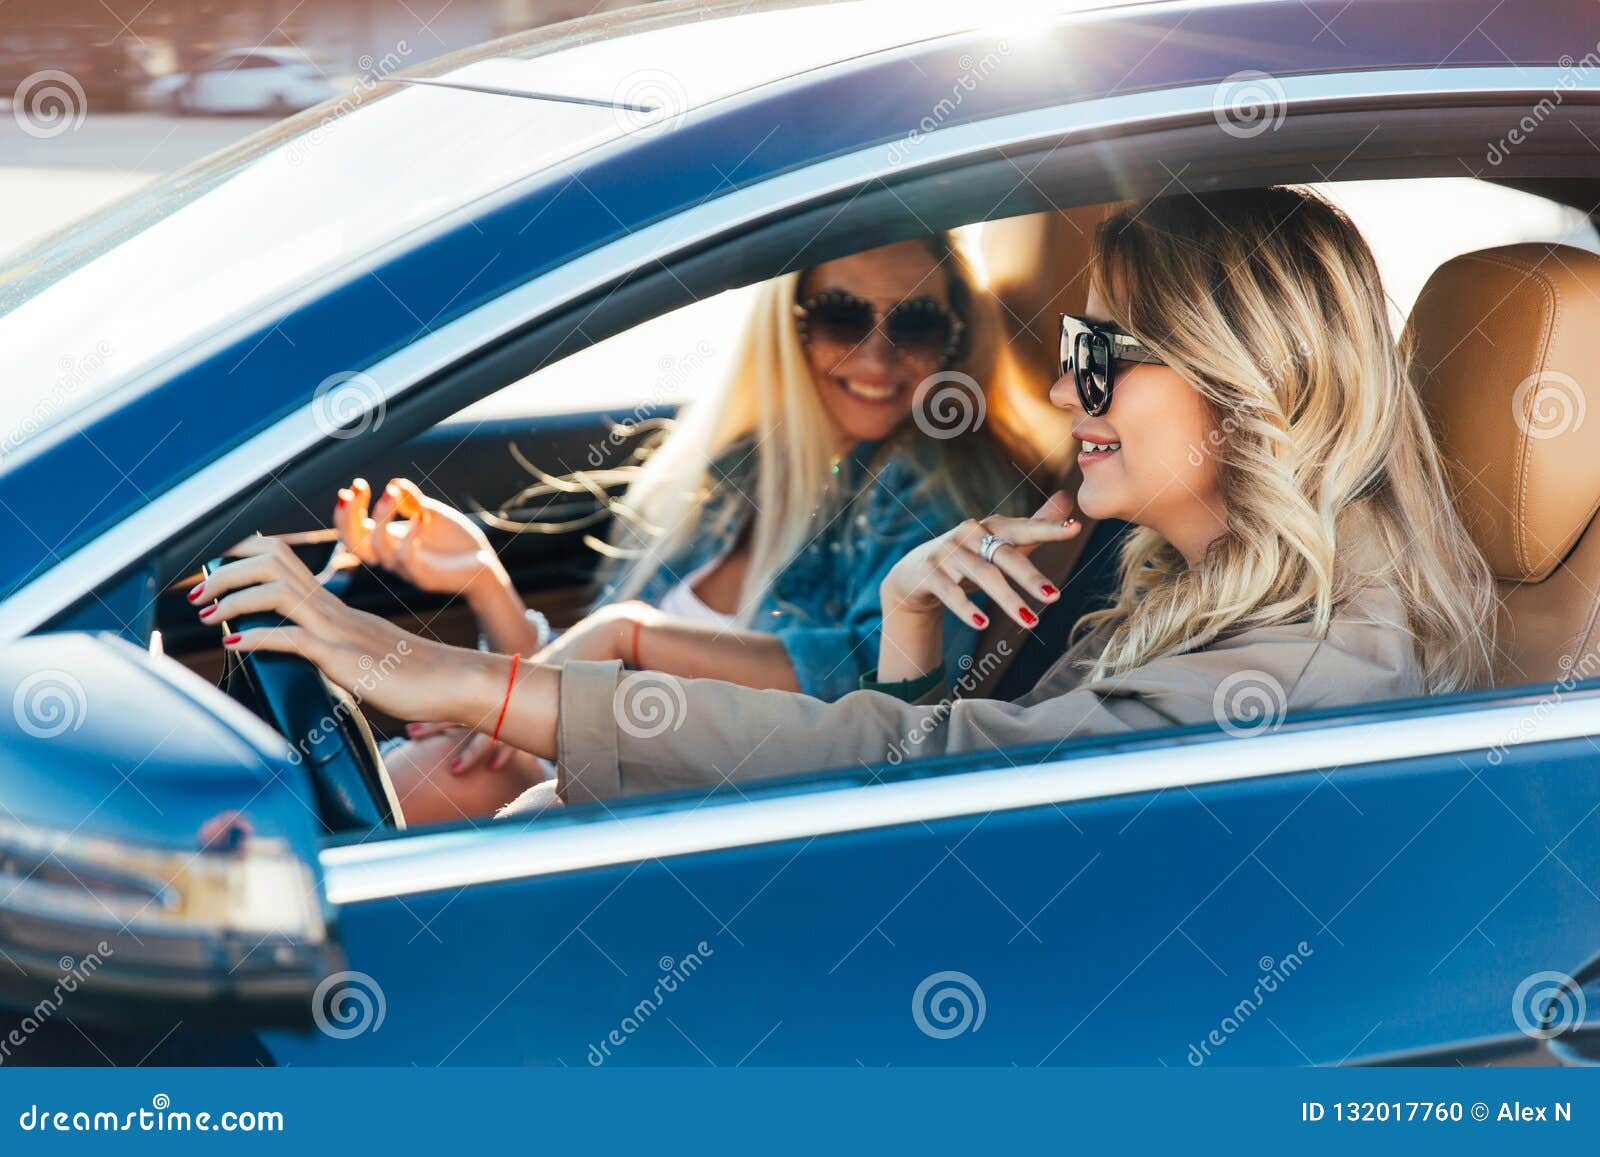 image of blondes wearing sunglasses while driving in car